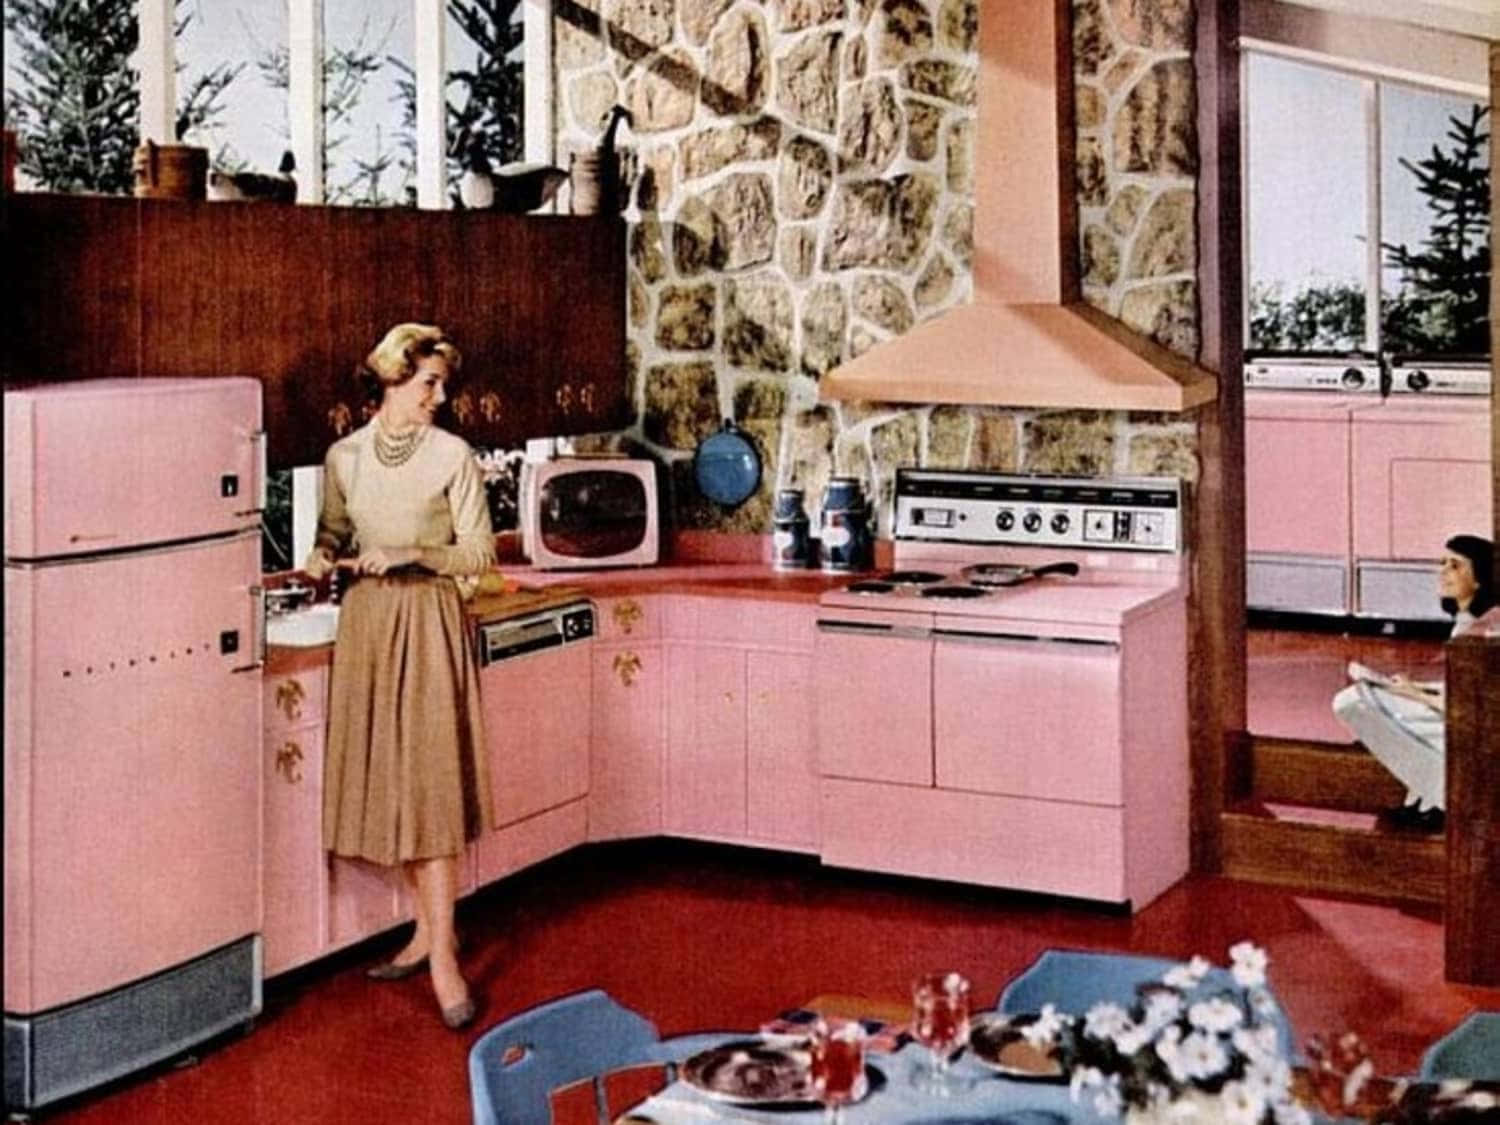 A Woman Is Standing In A Kitchen With Pink Appliances